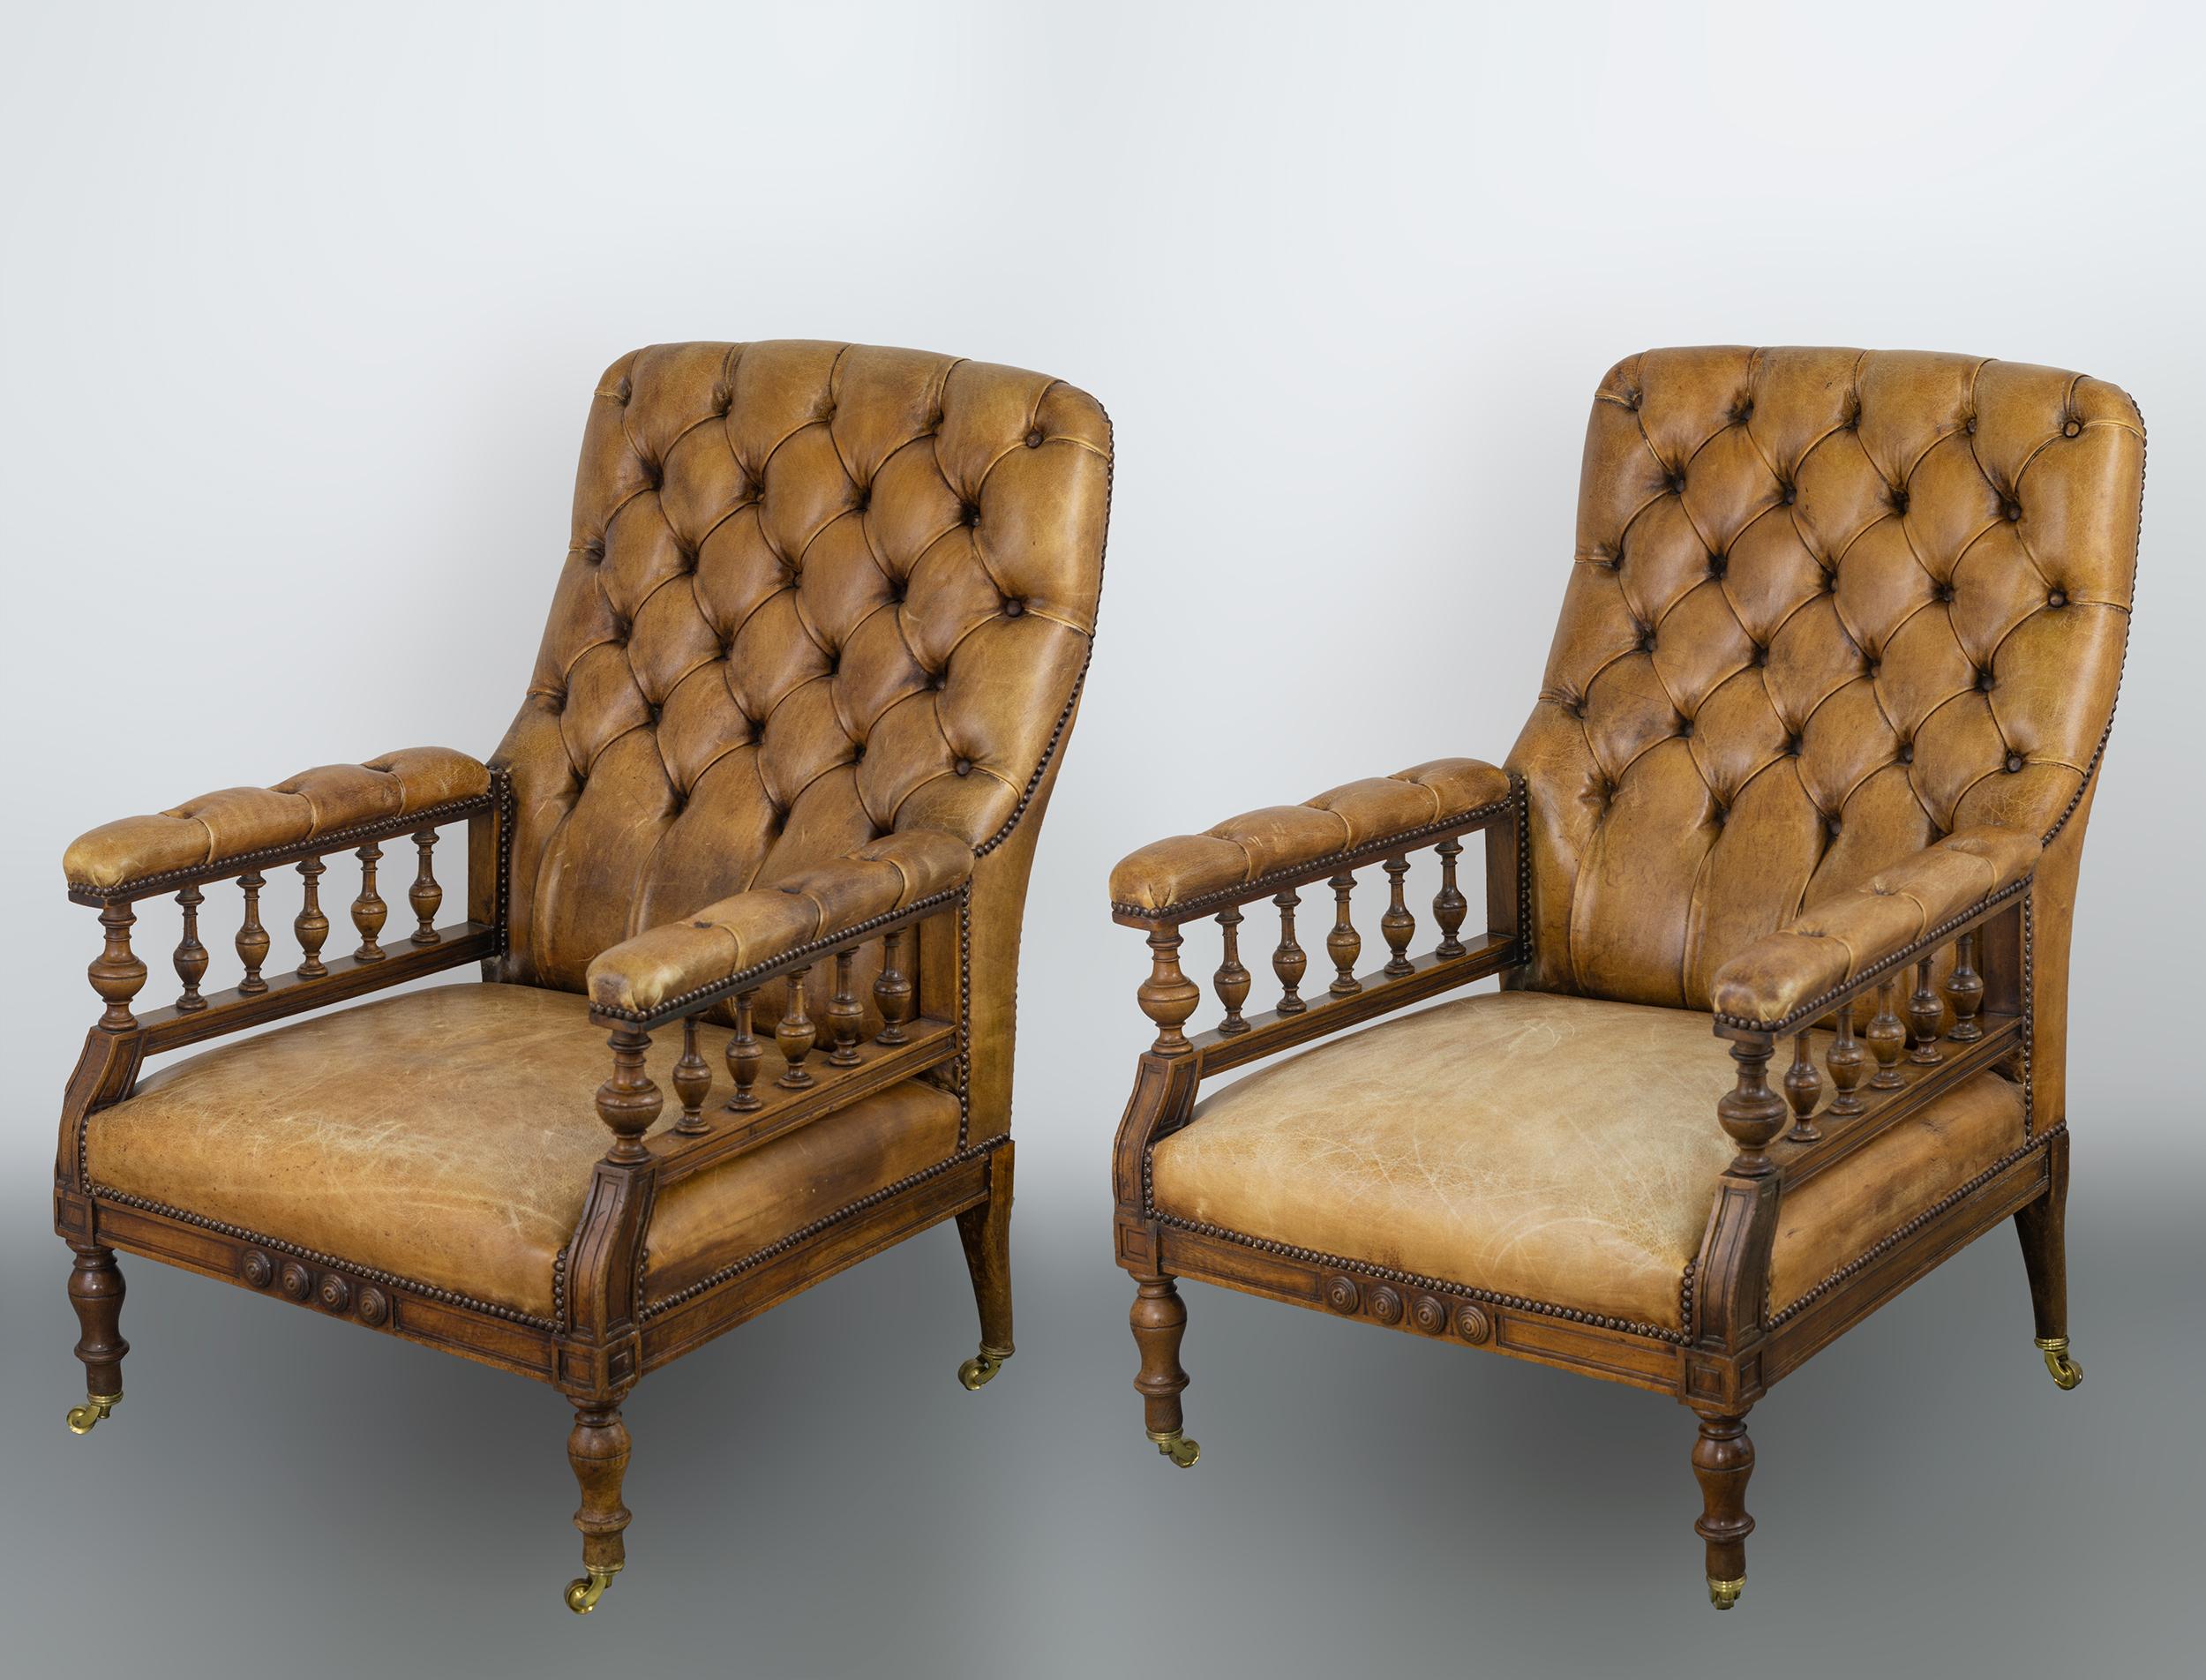 English Pair of William IV Leather Parlor Chairs